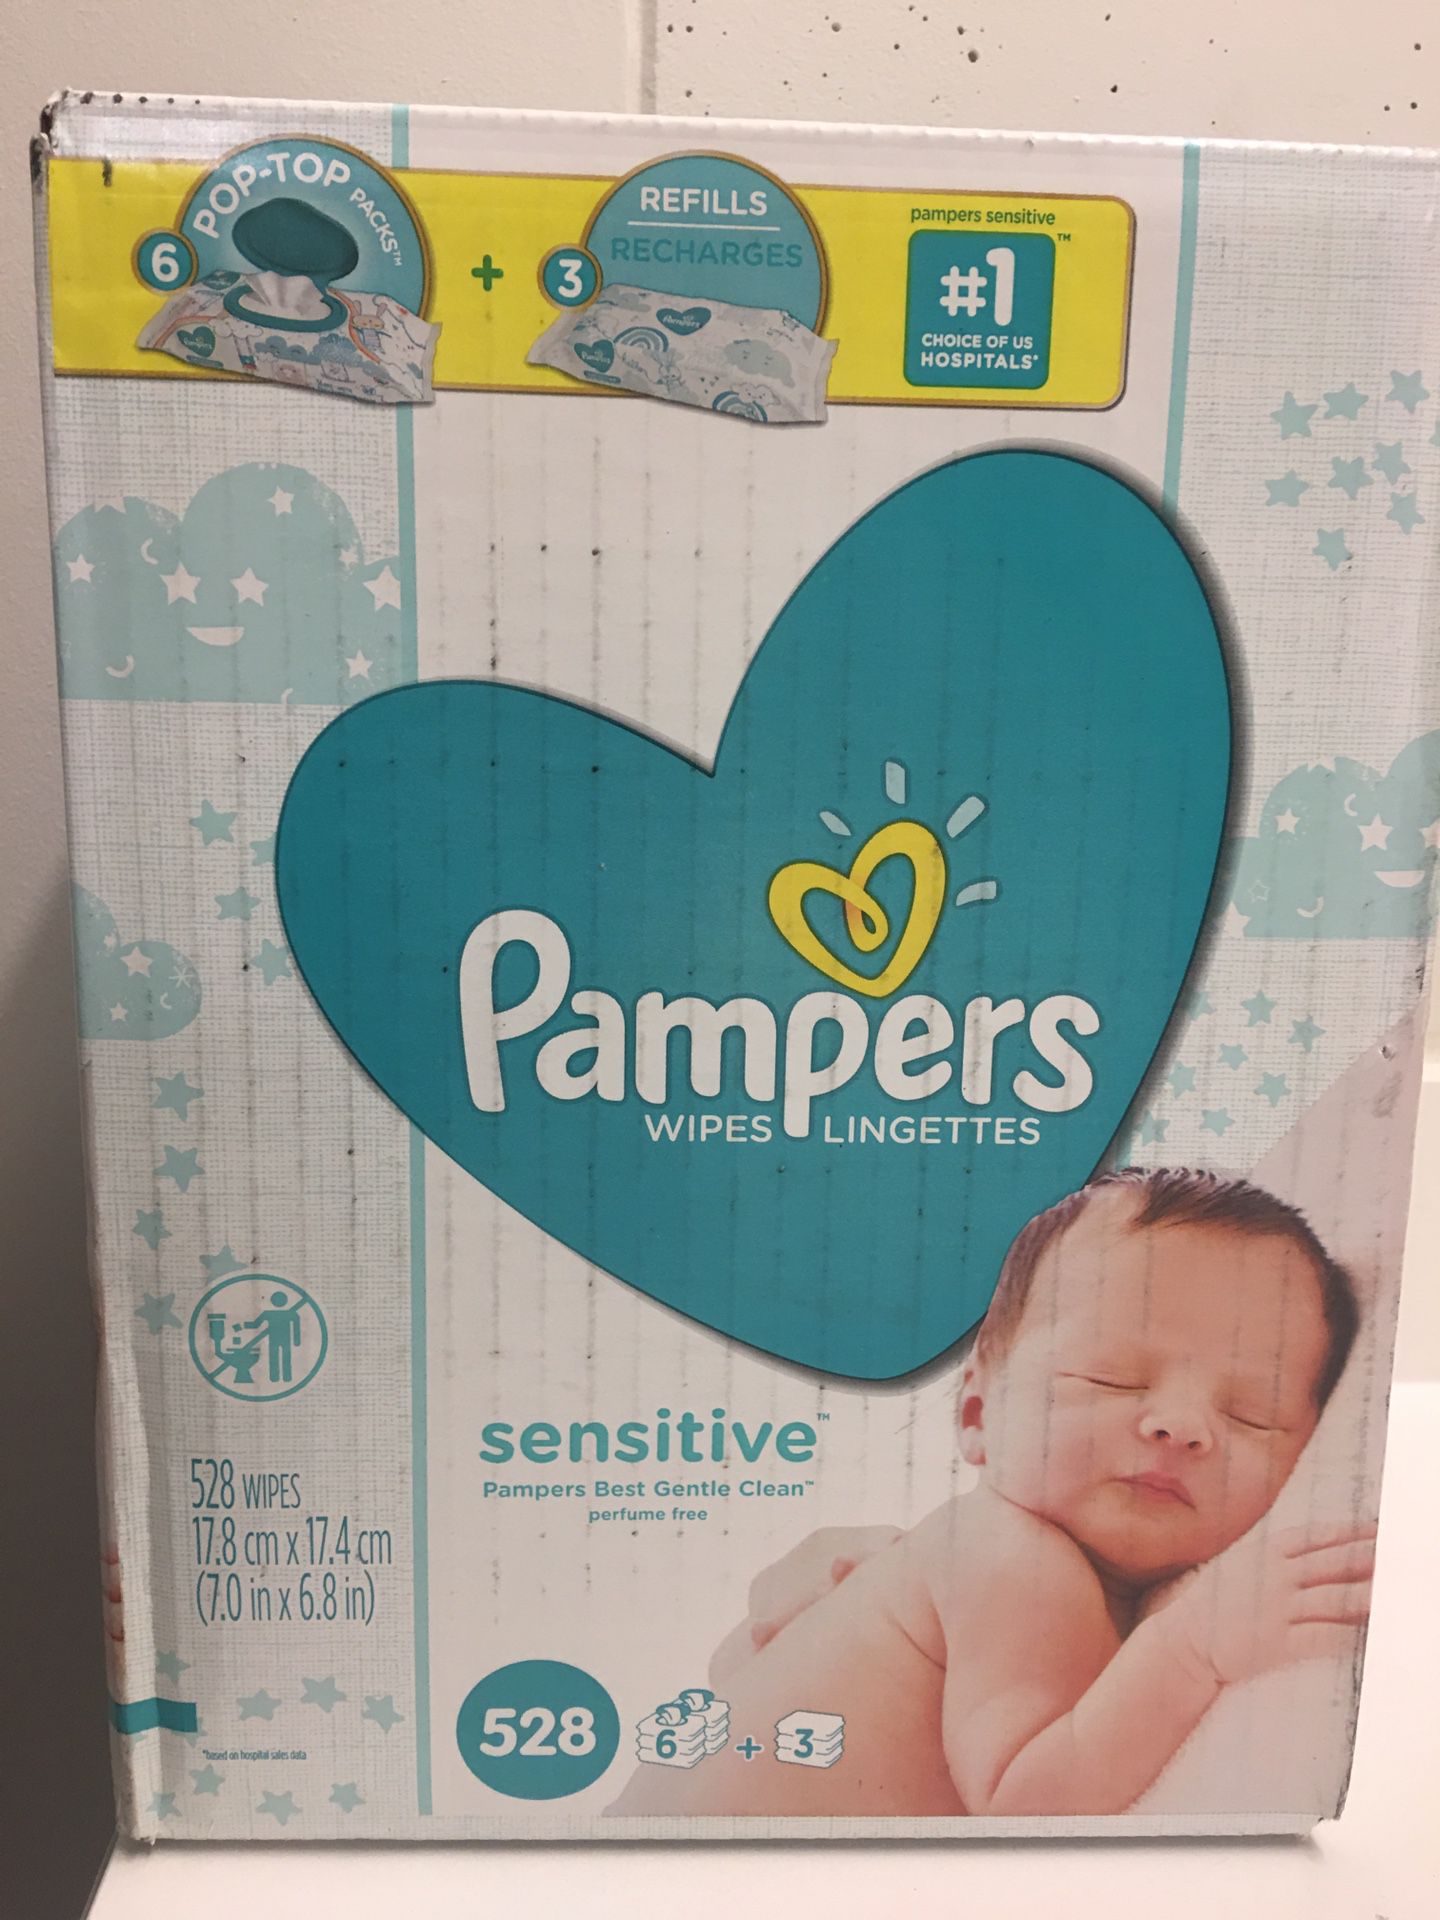 Pampers sensitive wipes, 528 count